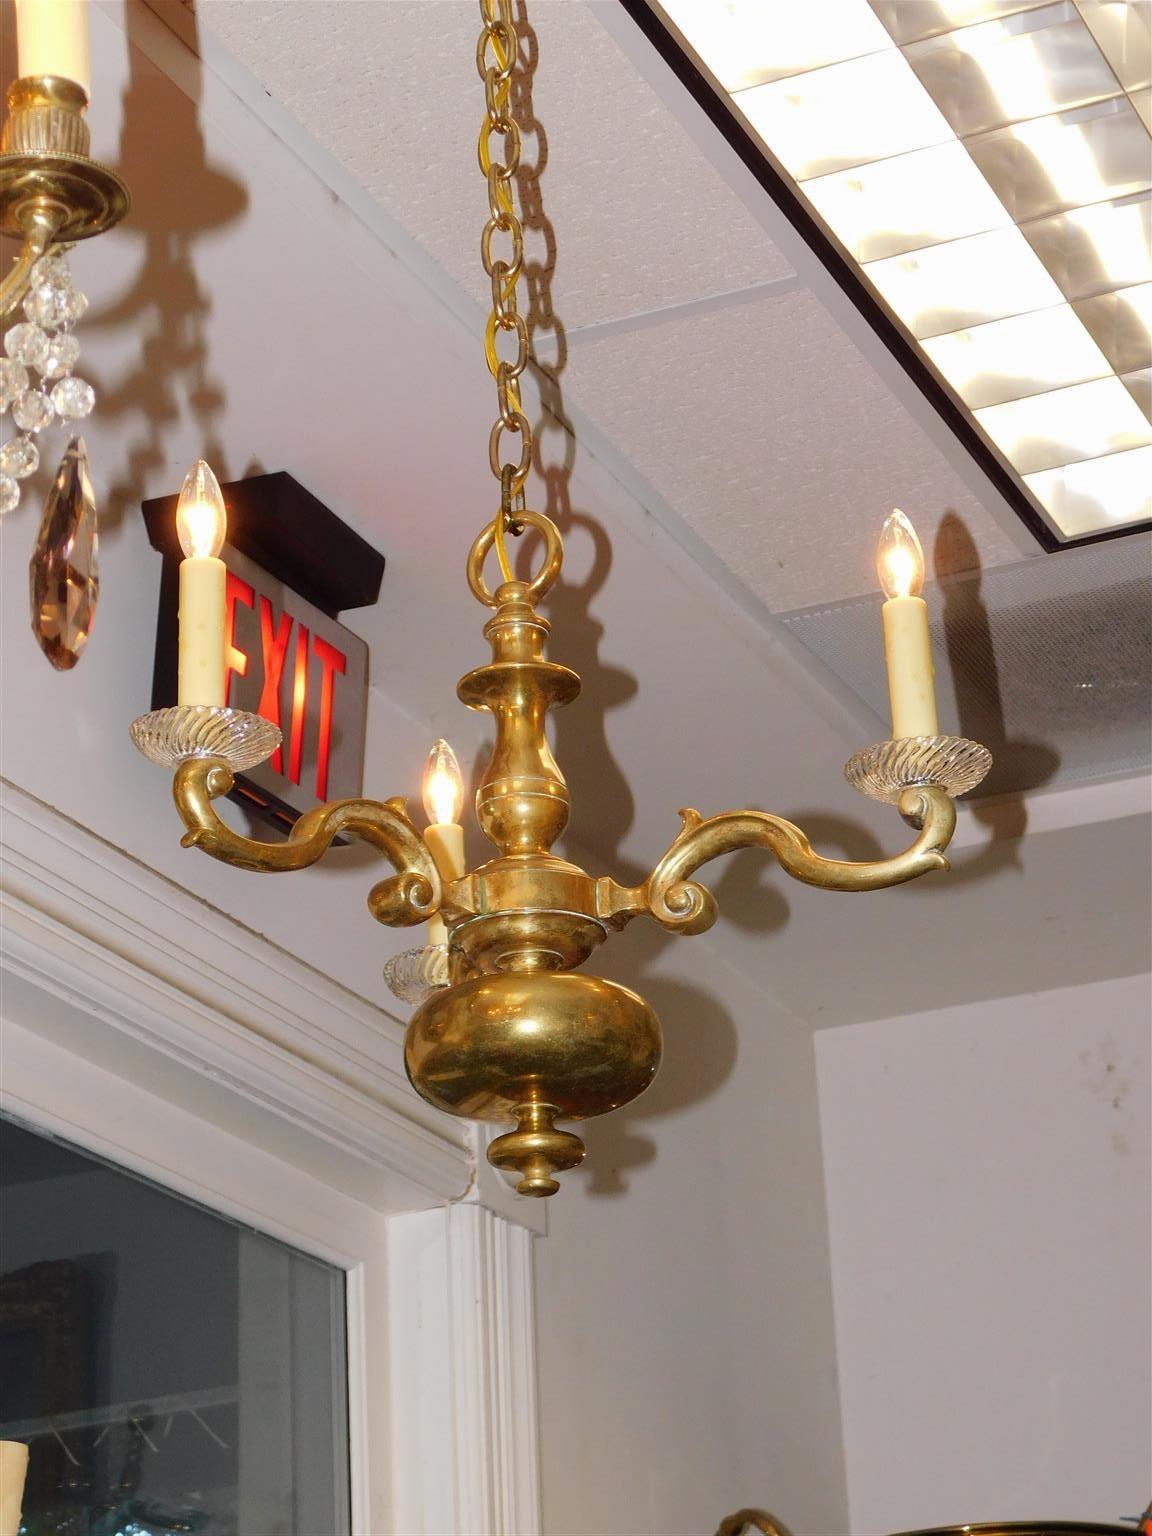 Dutch Colonial bronze and crystal bobeche three scrolled arm bulbous chandelier. Chandelier was originally candle powered and has been electrified. Early 19th century.